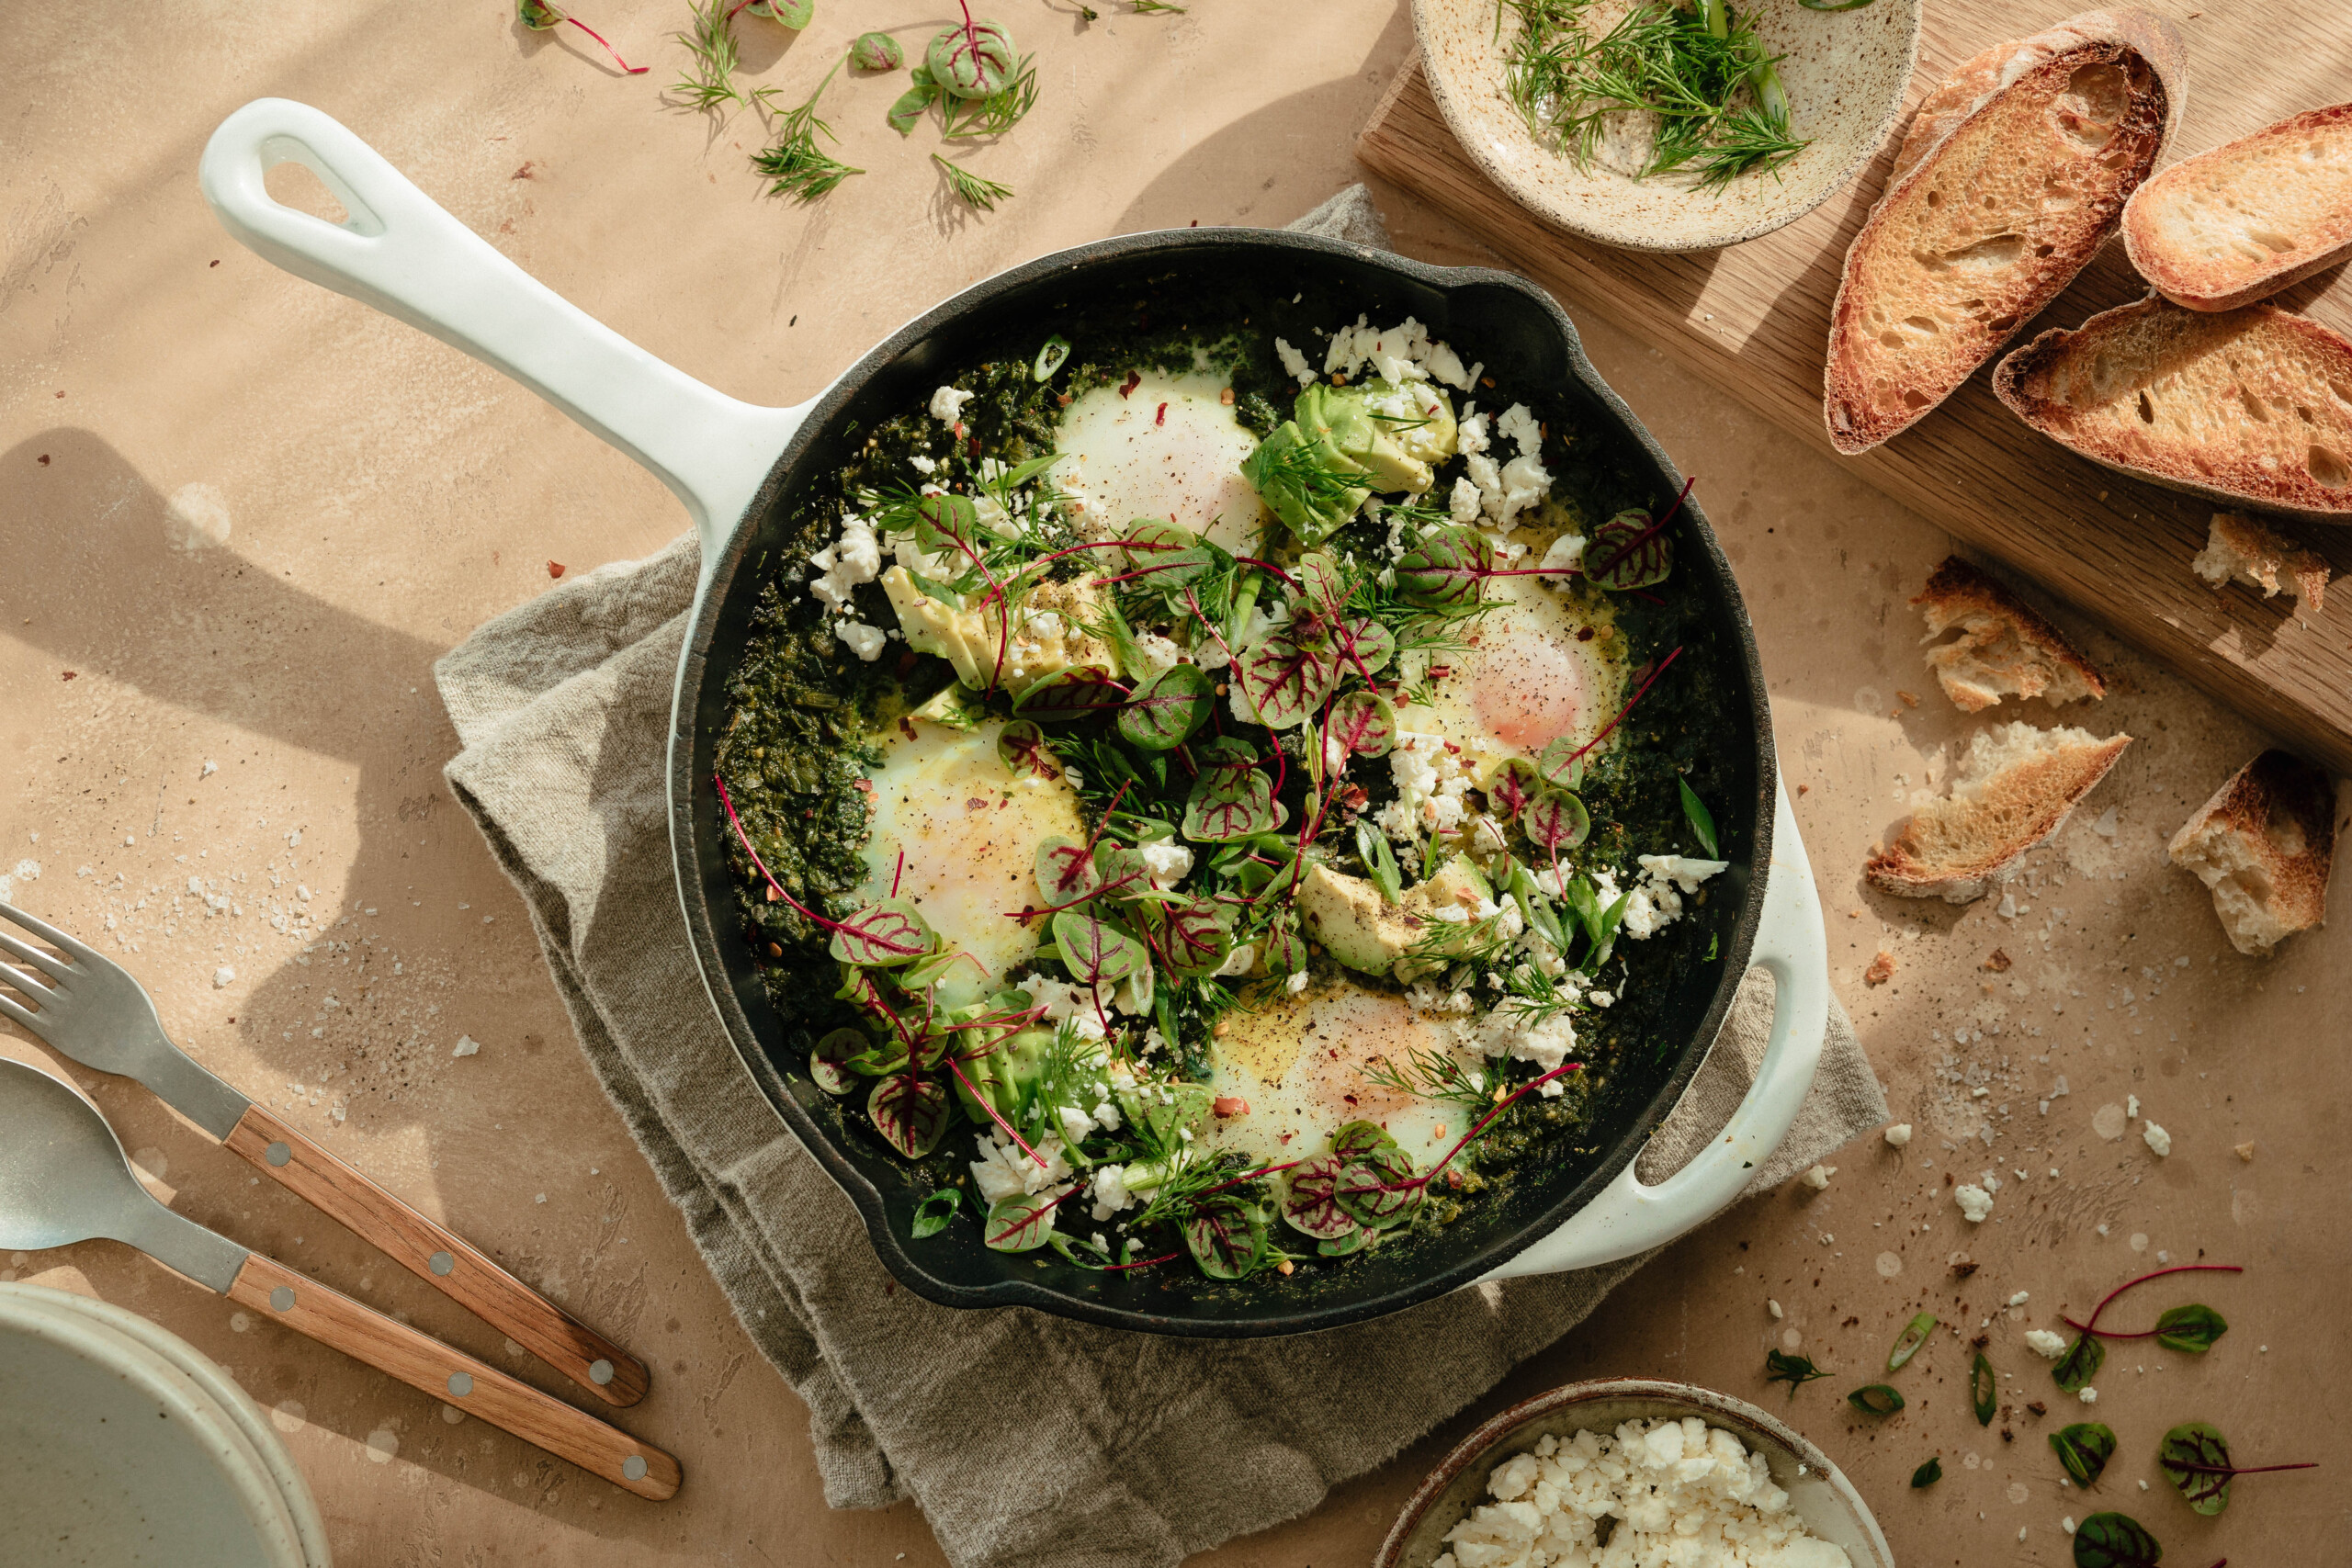 Green Shakshuka Is the Ultimate Fridge Clean-Out Meal